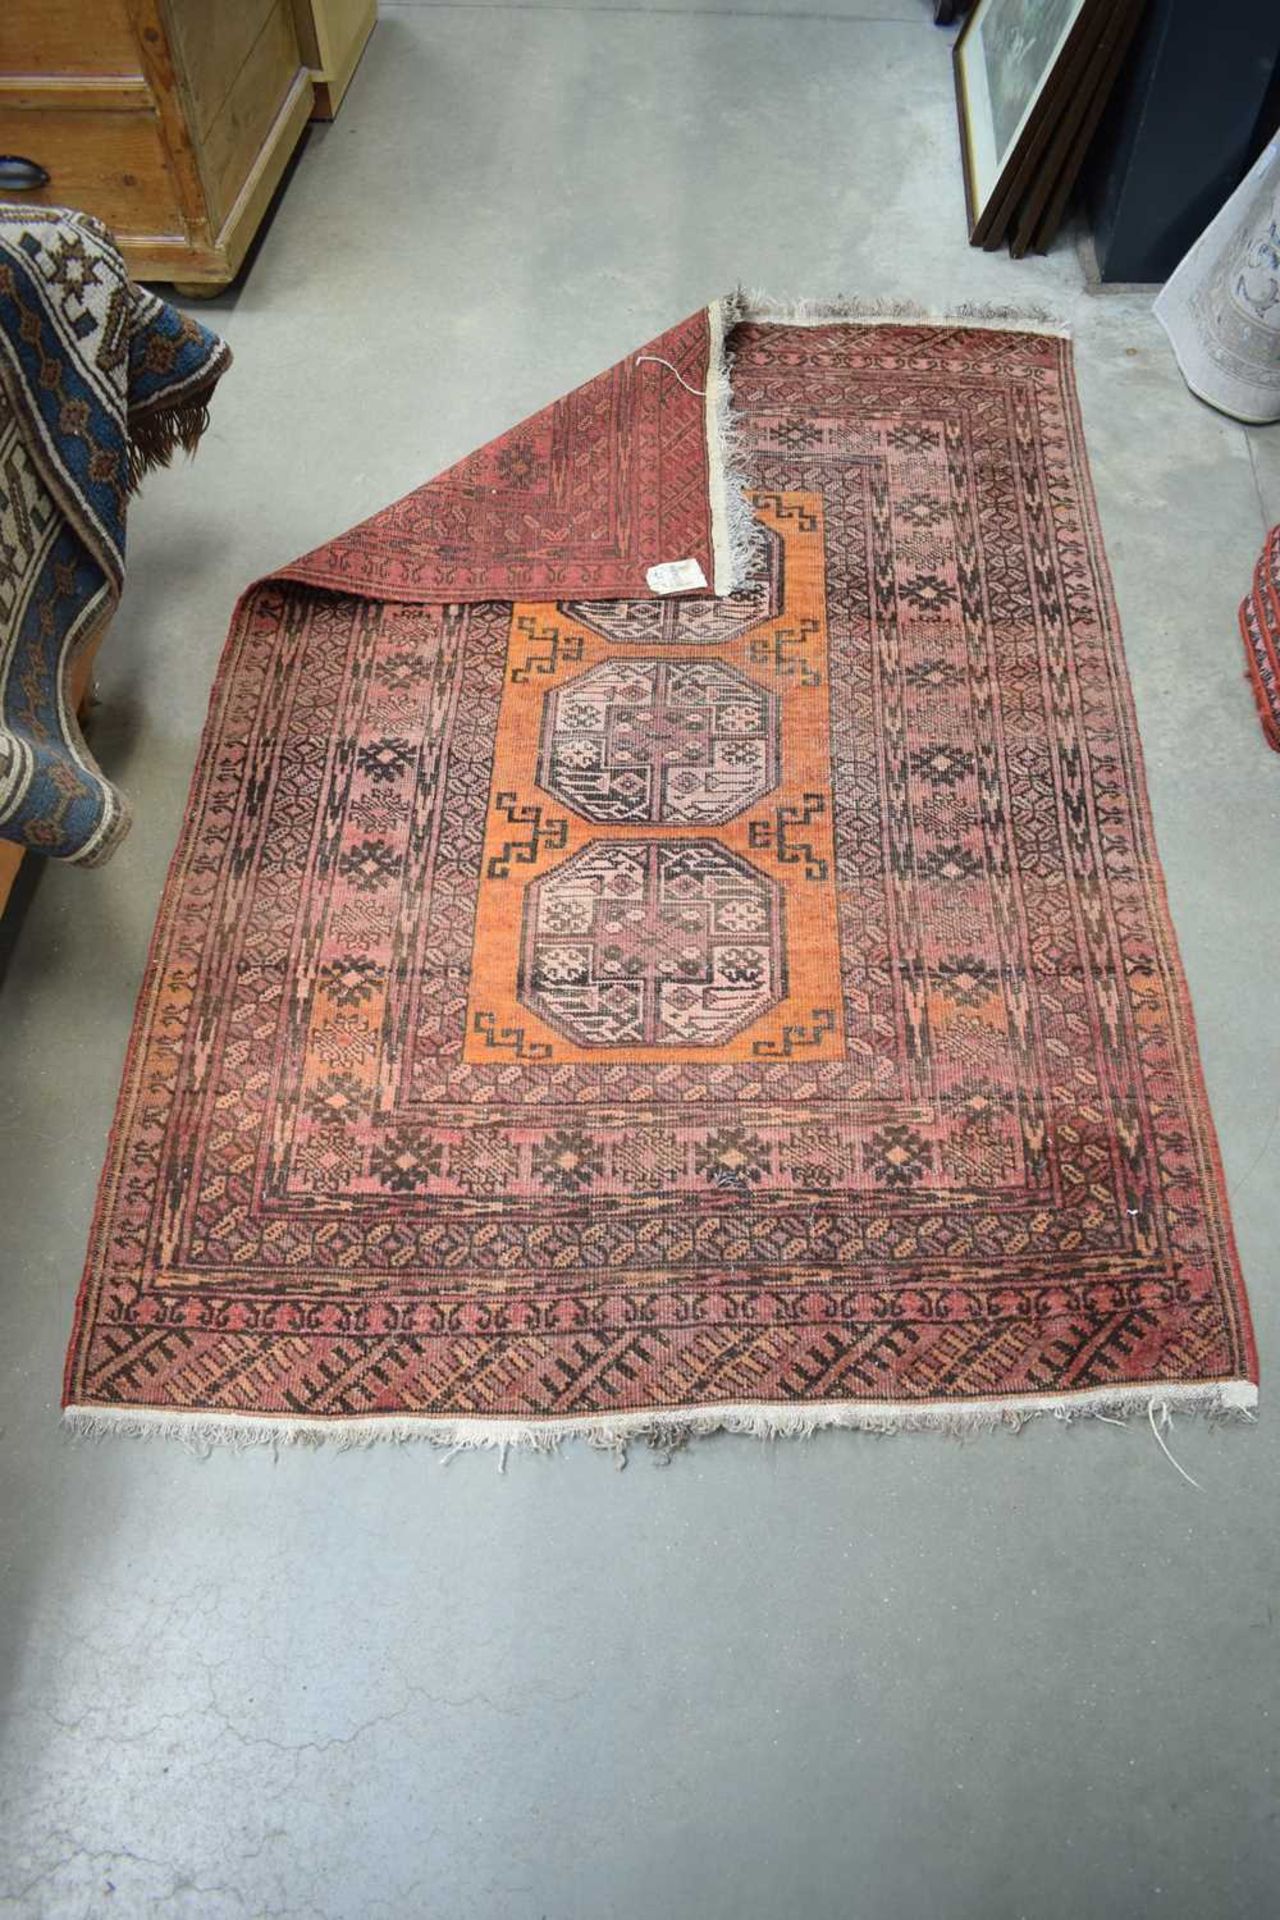 A Persian rug with three medallians, an orange ground and red bands, 156 x 106 cm